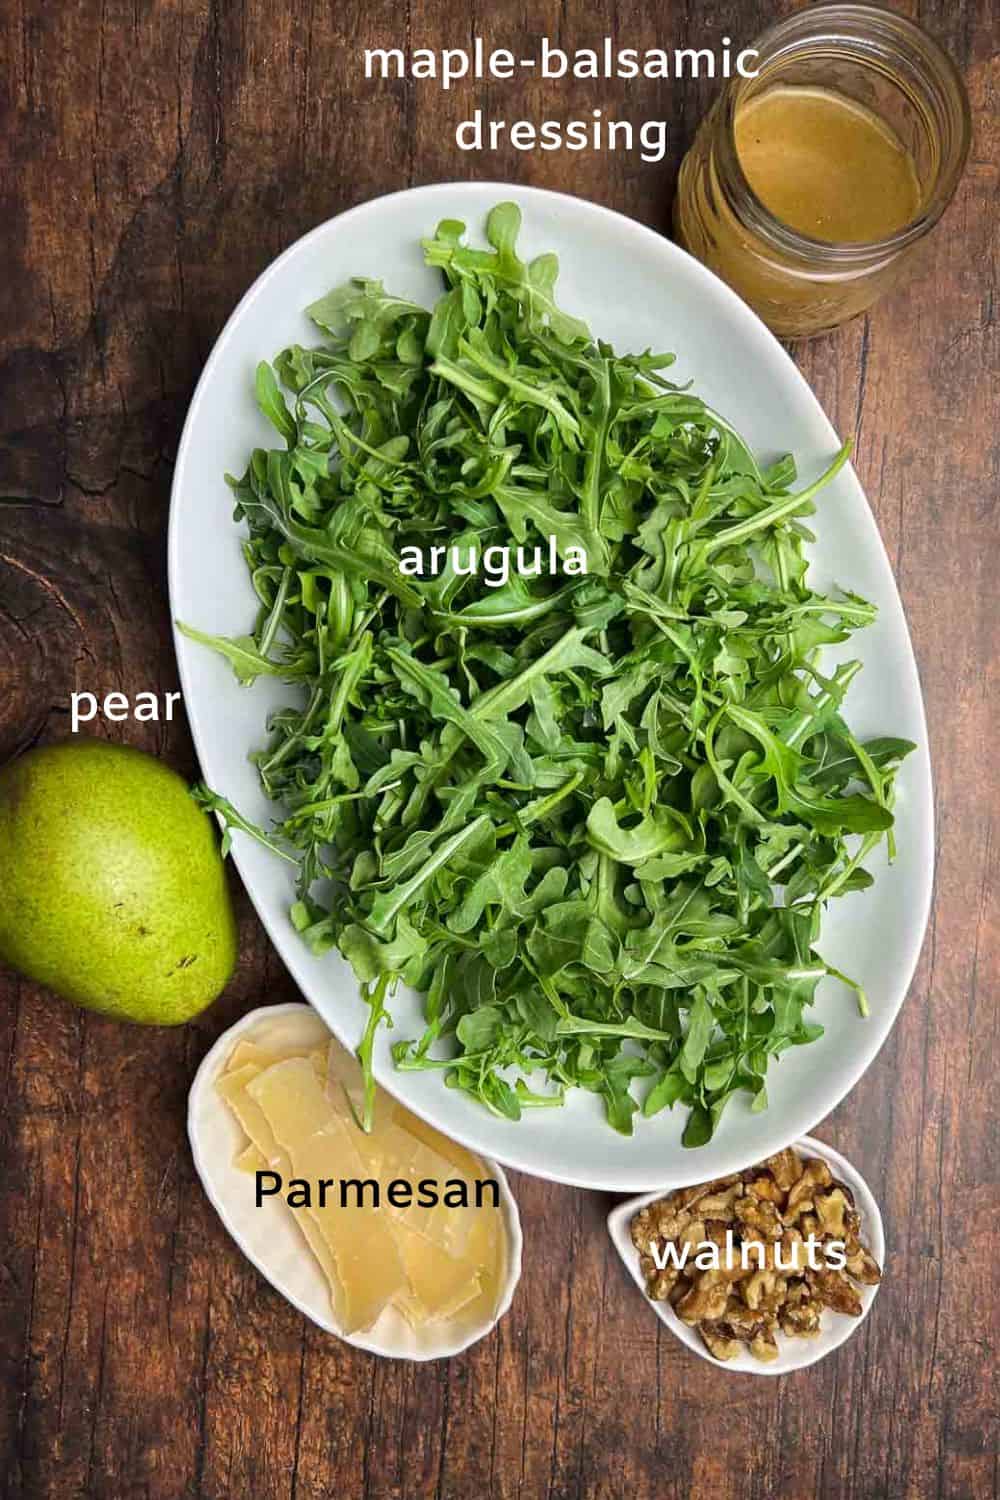 Ingredients for arugula salad with parmesan and pears.